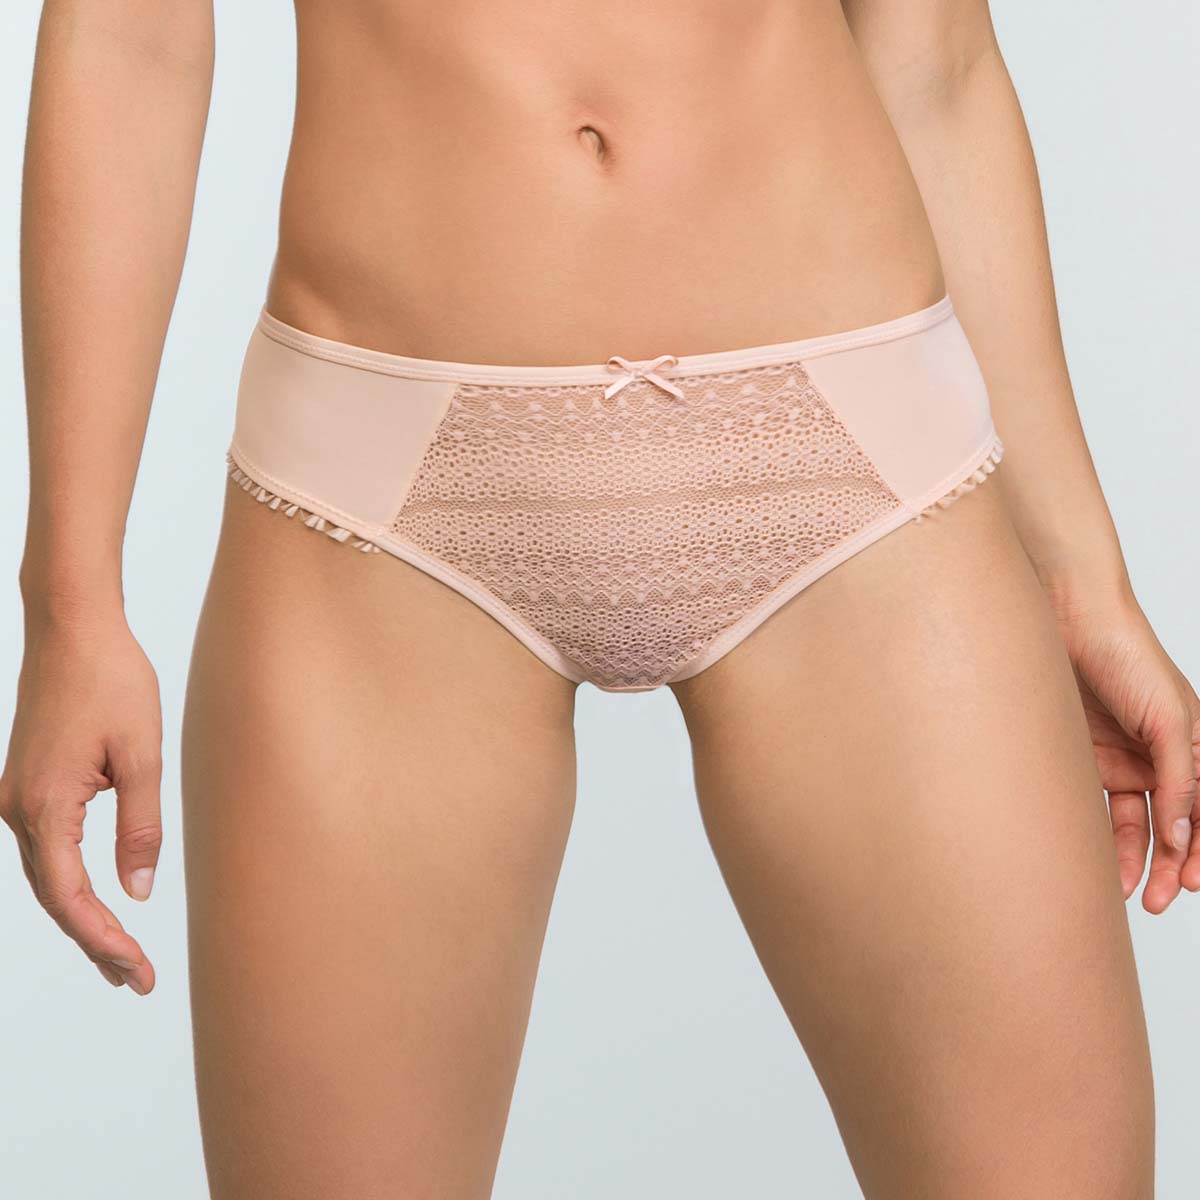 Women's Briefs in Nude Pink Lace Mod by Dim